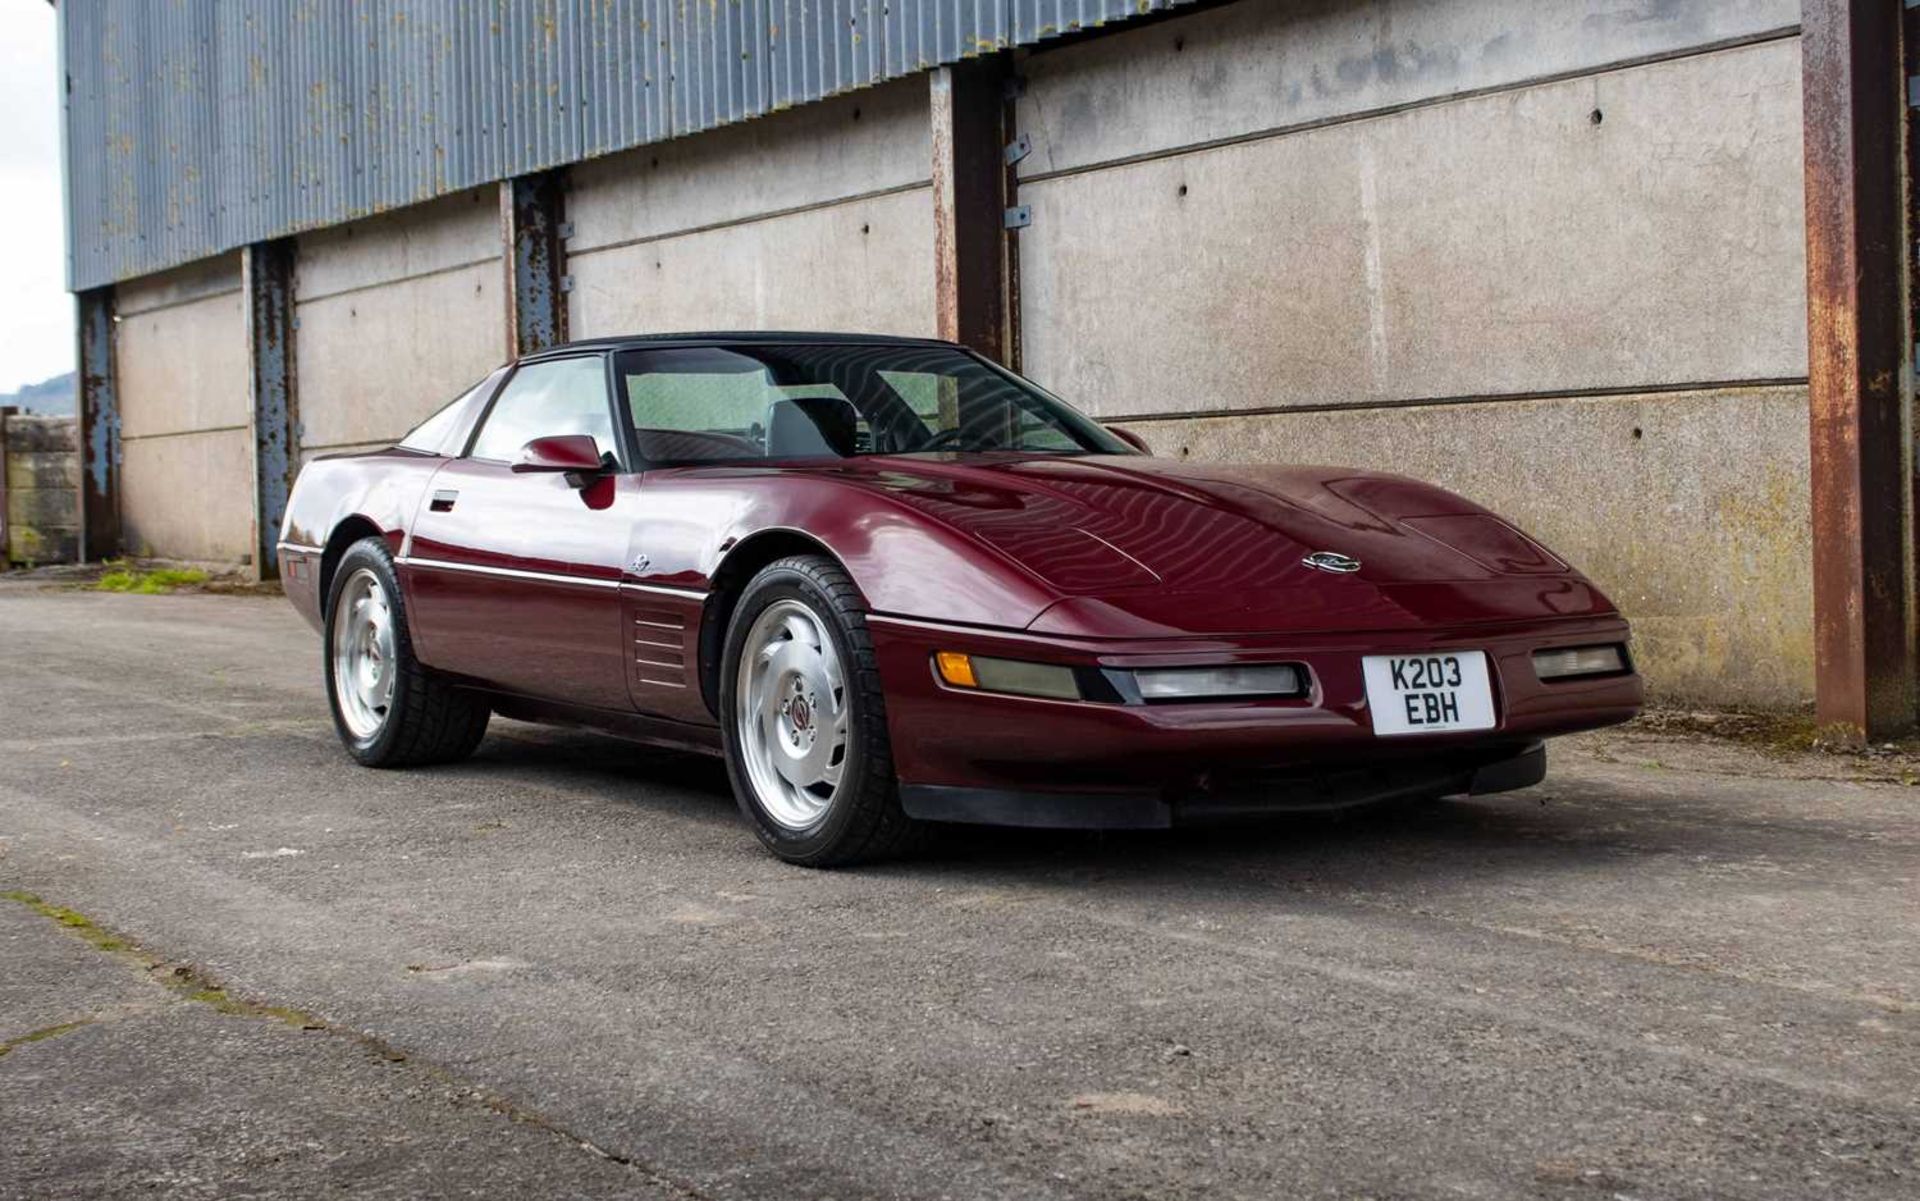 1993 Chevrolet Corvette C4  The highly sought-after 40th Anniversary Edition  - Image 78 of 78